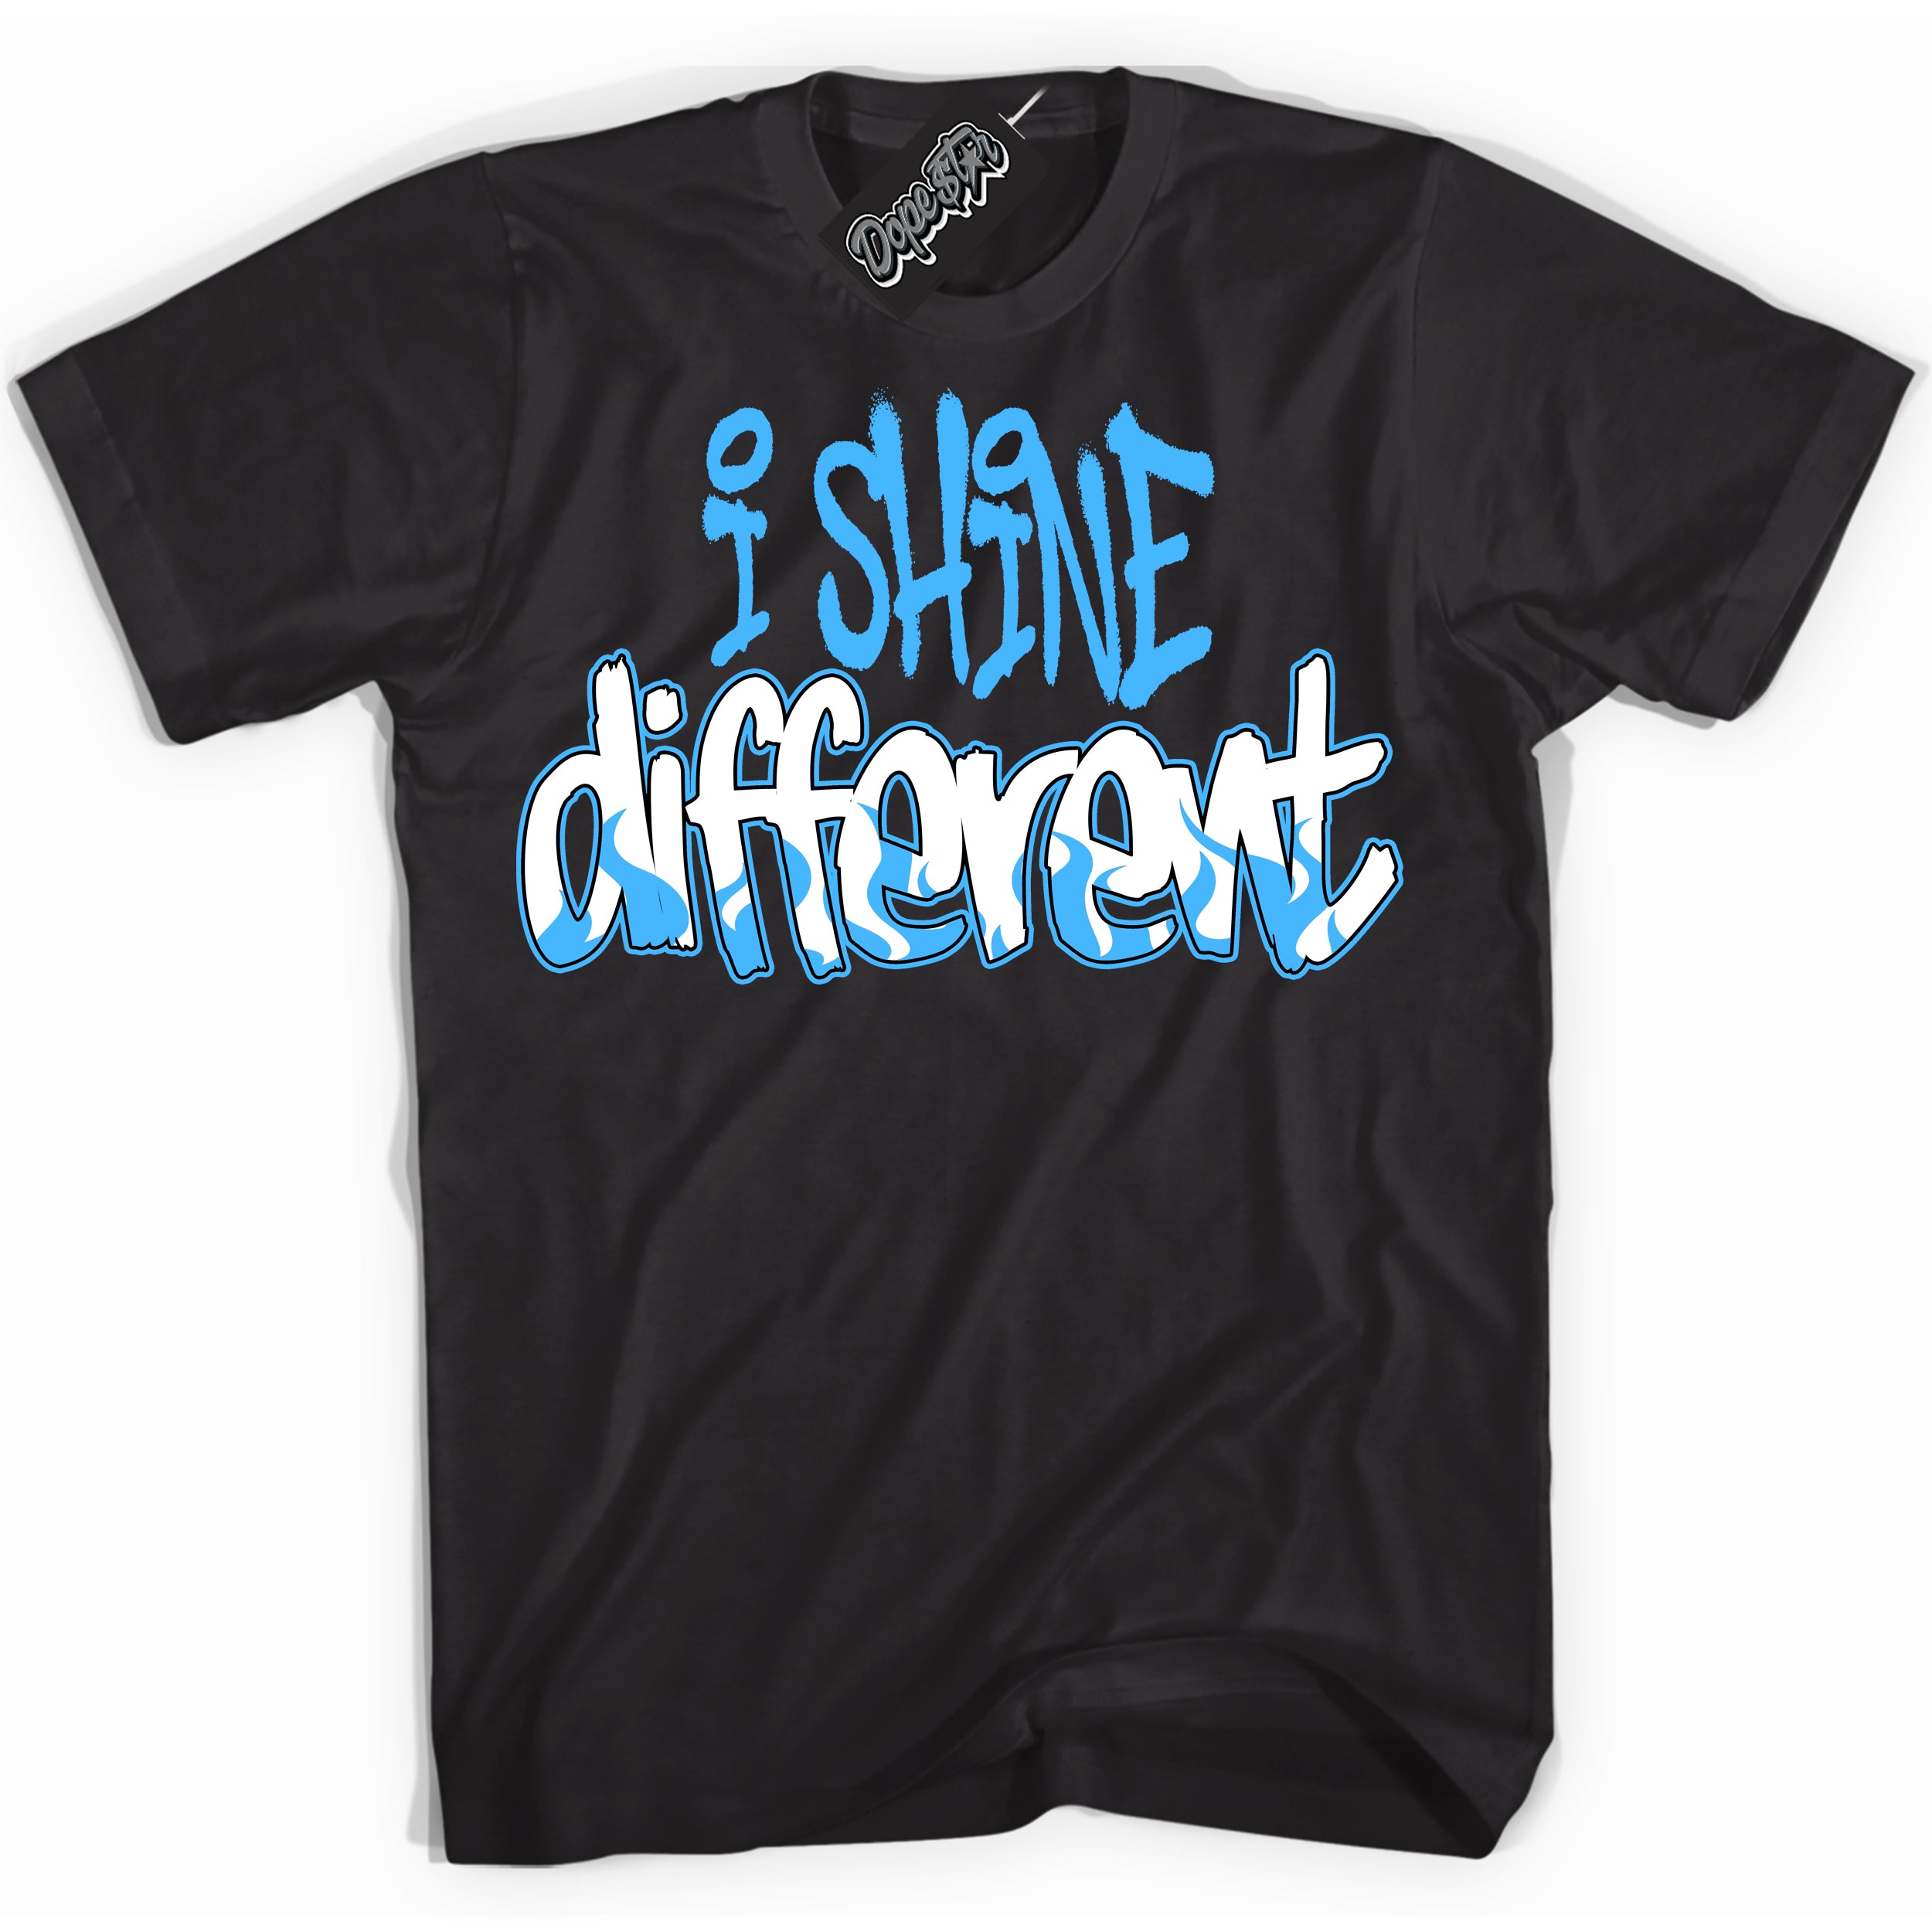 Cool Black graphic tee with “ I Shine Different ” design, that perfectly matches Powder Blue 9s sneakers 